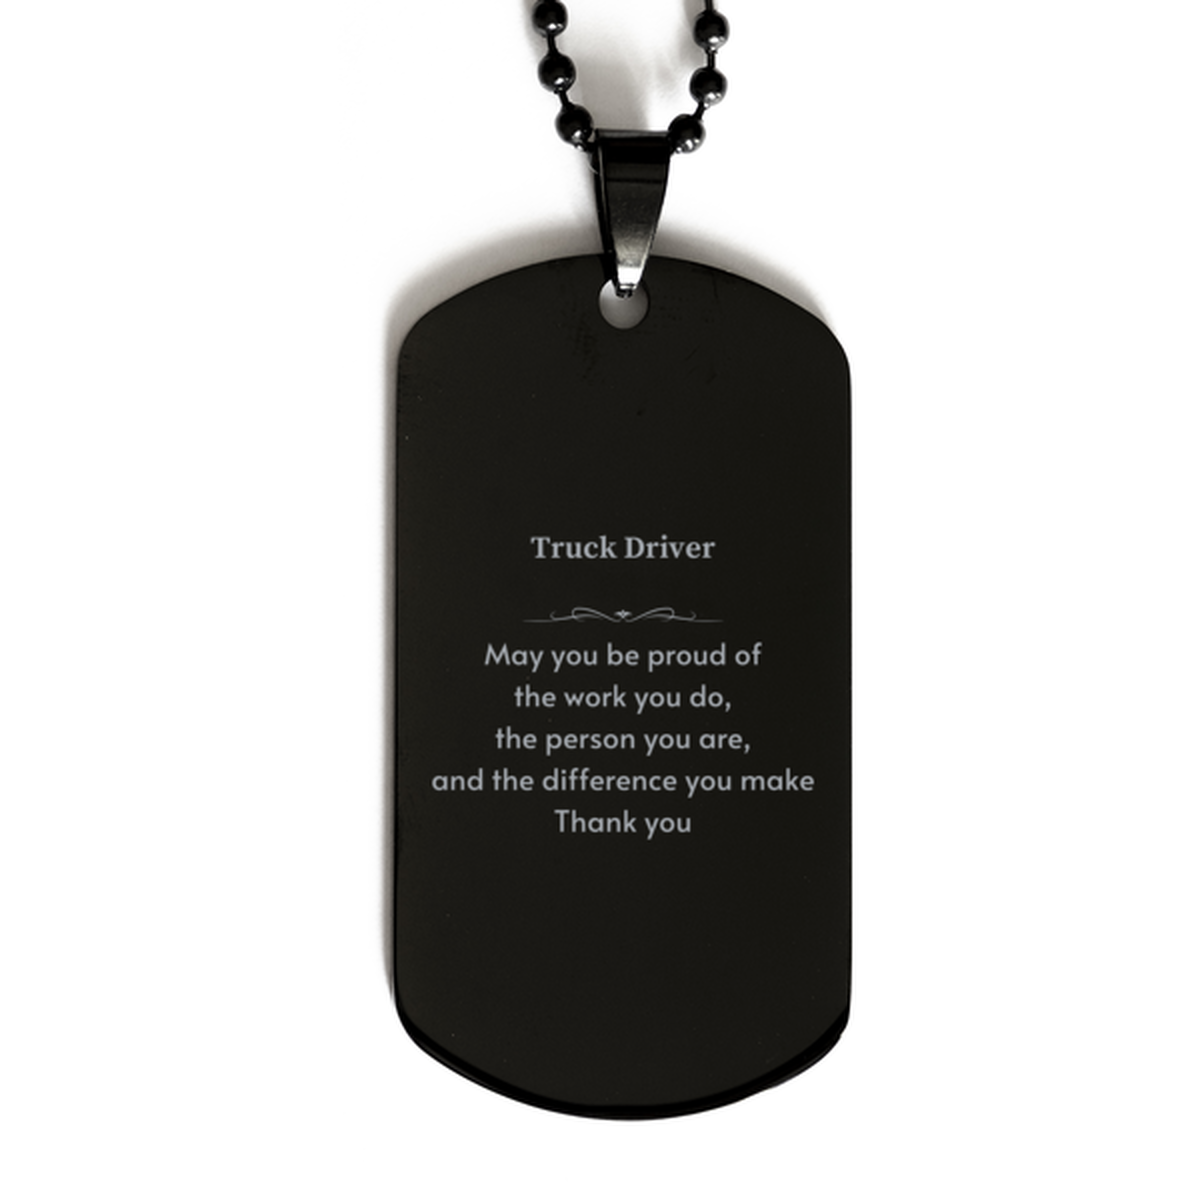 Heartwarming Black Dog Tag Retirement Coworkers Gifts for Truck Driver, Truck Driver May You be proud of the work you do, the person you are Gifts for Boss Men Women Friends